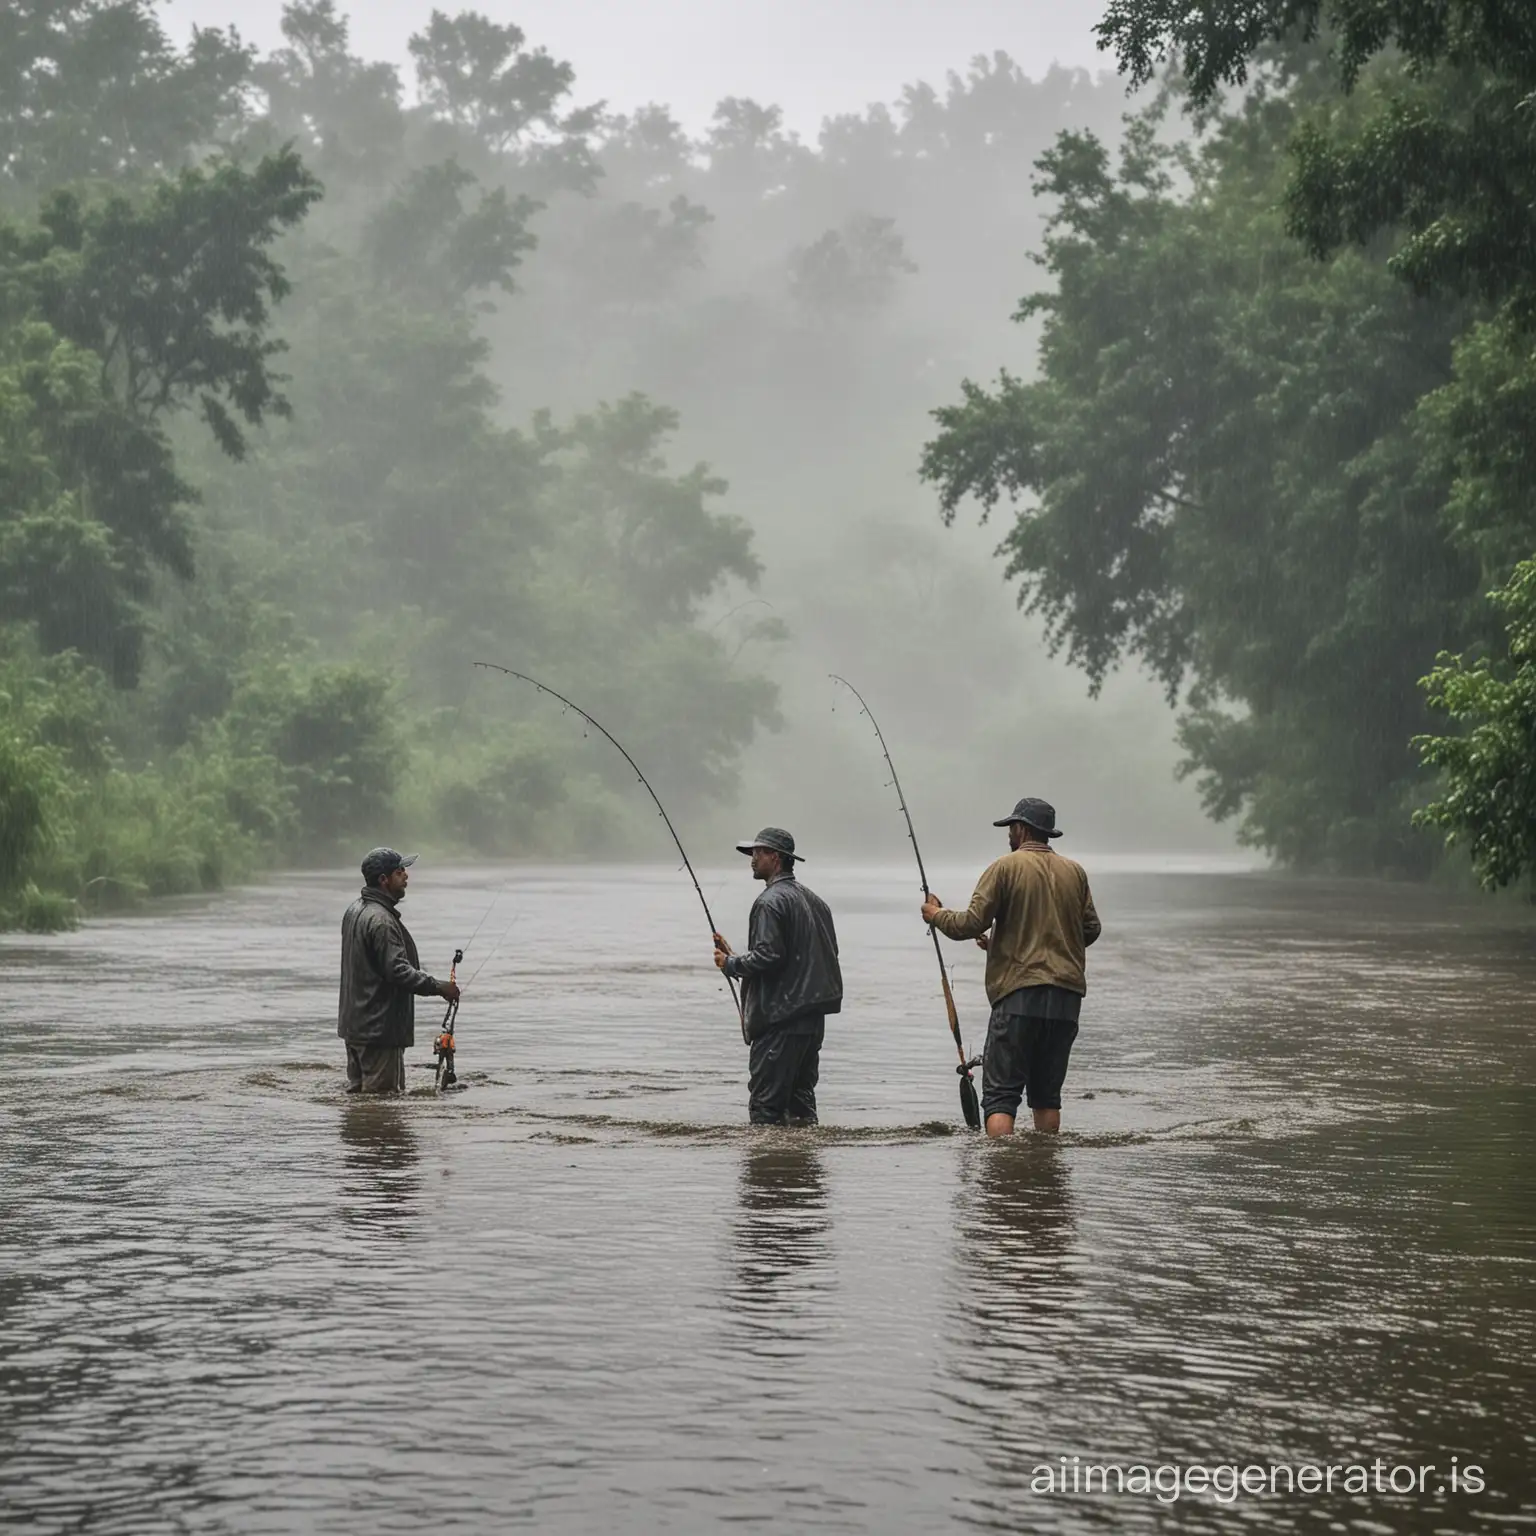 3 man fishing from cano in river,,rain day and strok background